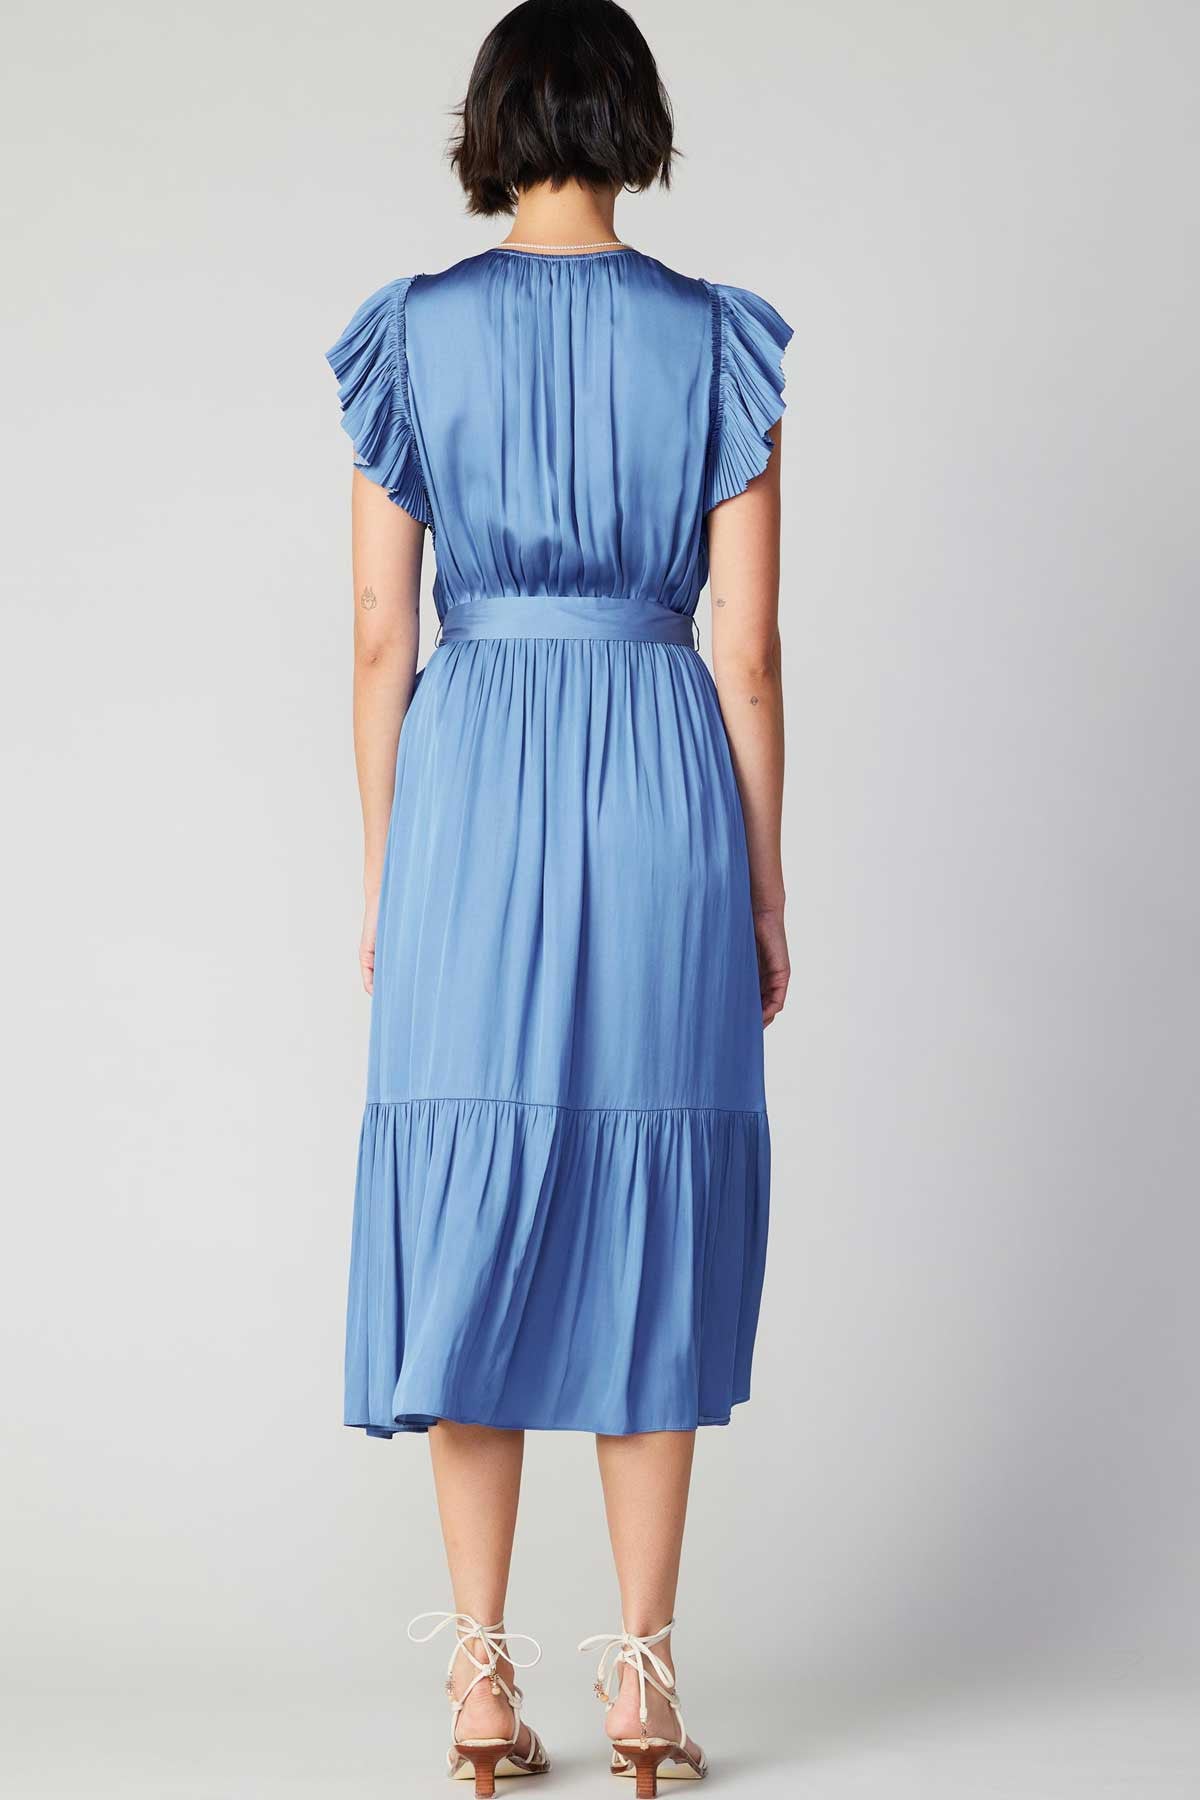 Flutter Sleeve V-neck Dress in dusty blue by Current Air